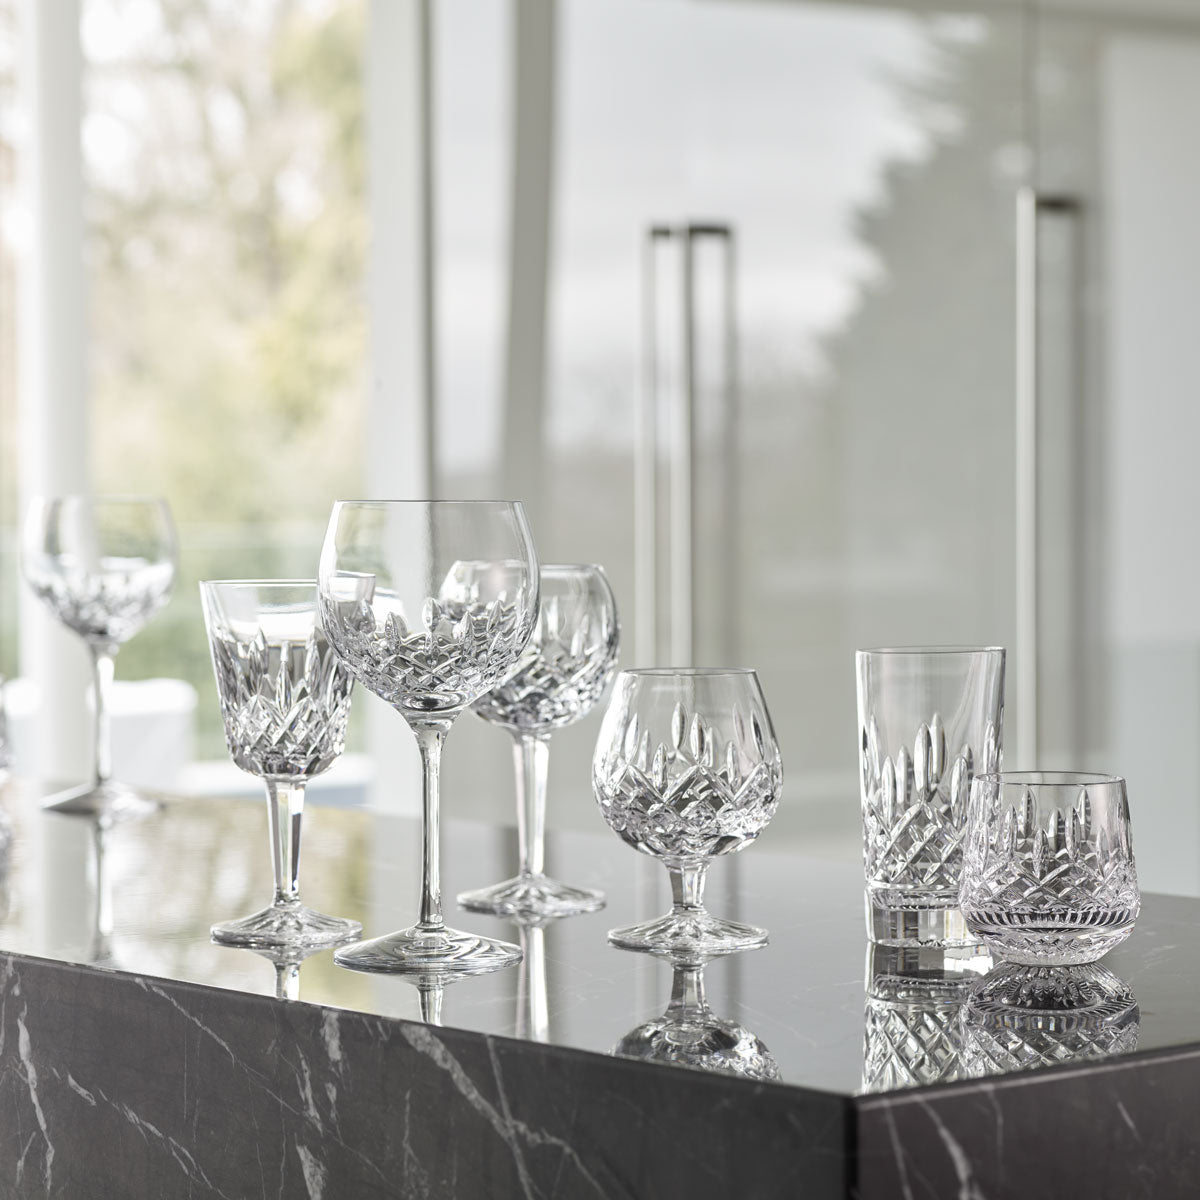 Waterford Crystal Lismore Whiskey Glass Set of 4  The Waterford Lismore pattern is a stunning combination of brilliance and clarity. You could honor Lismore's Irish roots serving drams in these Lismore Old Fashioned glasses, or use them to serve spirits 'on the rocks.'